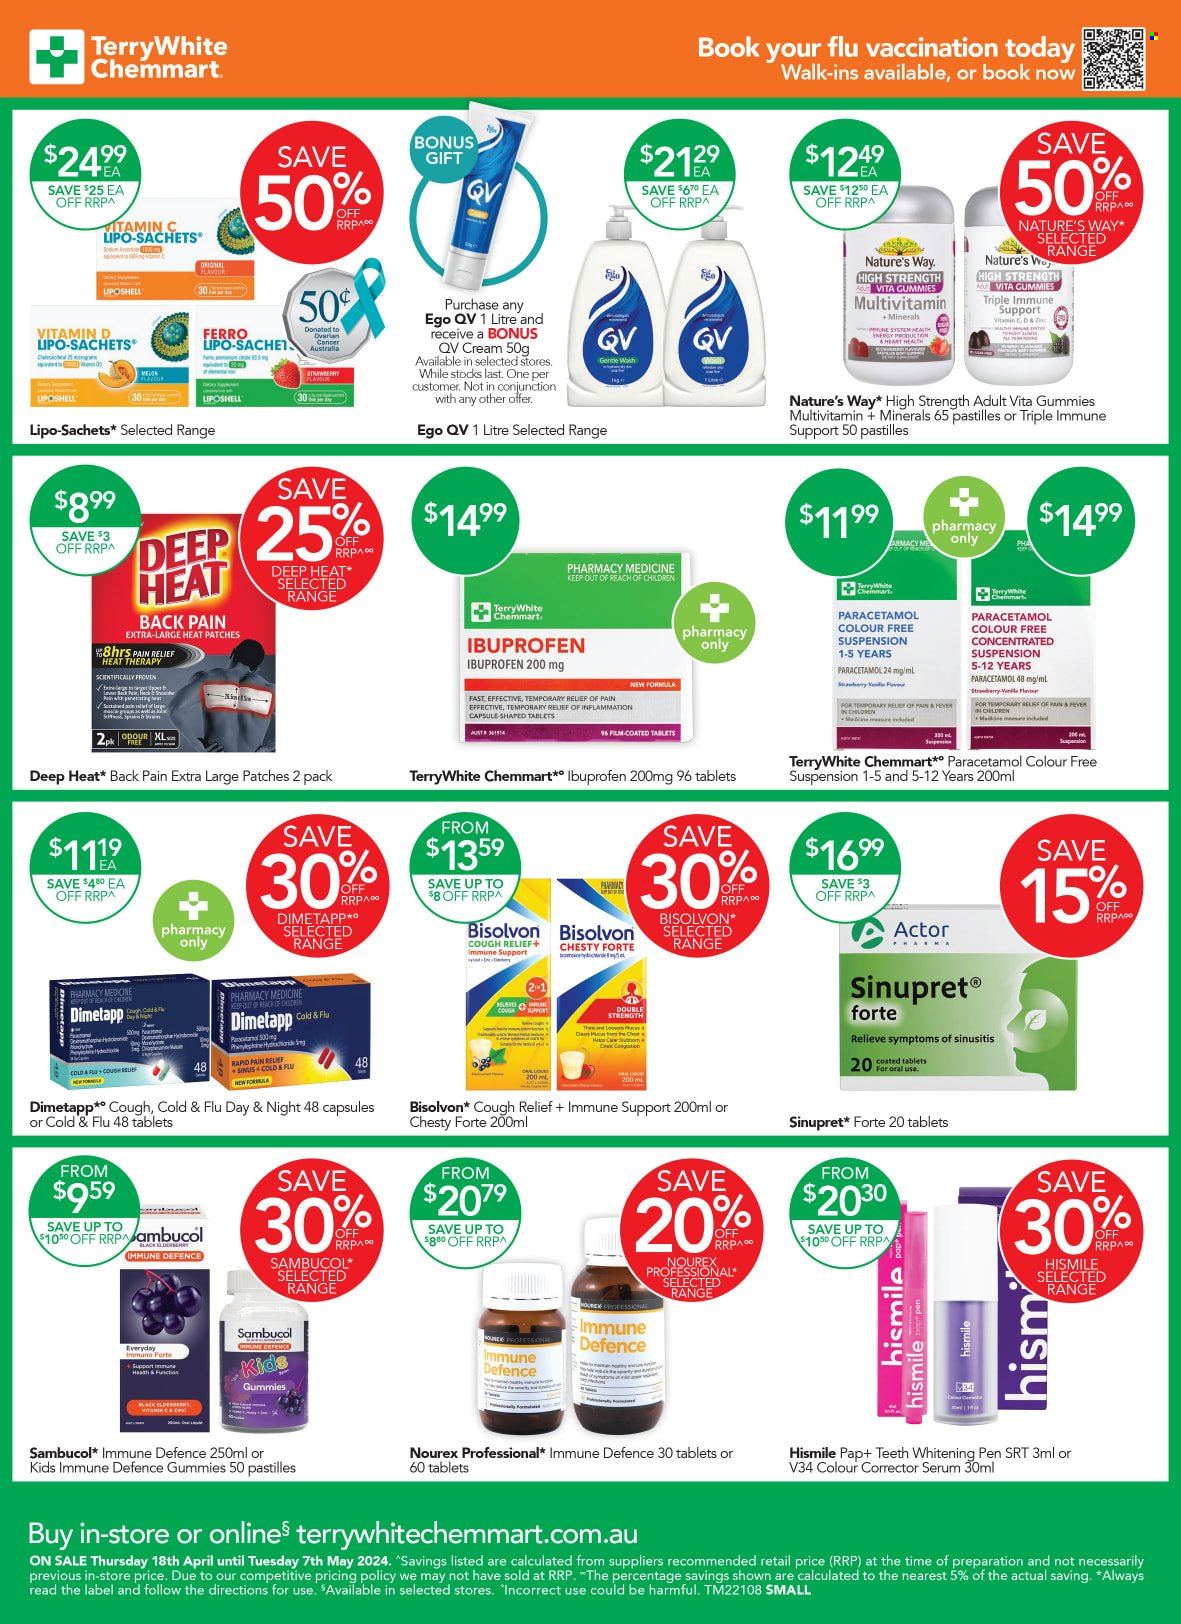 thumbnail - TerryWhite Chemmart Catalogue - 18 Apr 2024 - 7 May 2024 - Sales products - intimate wash, teeth whitening, serum, pain relief, Dimetapp, Cold & Flu, multivitamin, Ibuprofen, pastilles, Sambucol, dietary supplement, health supplement, medicine, pain therapy, corrector. Page 2.